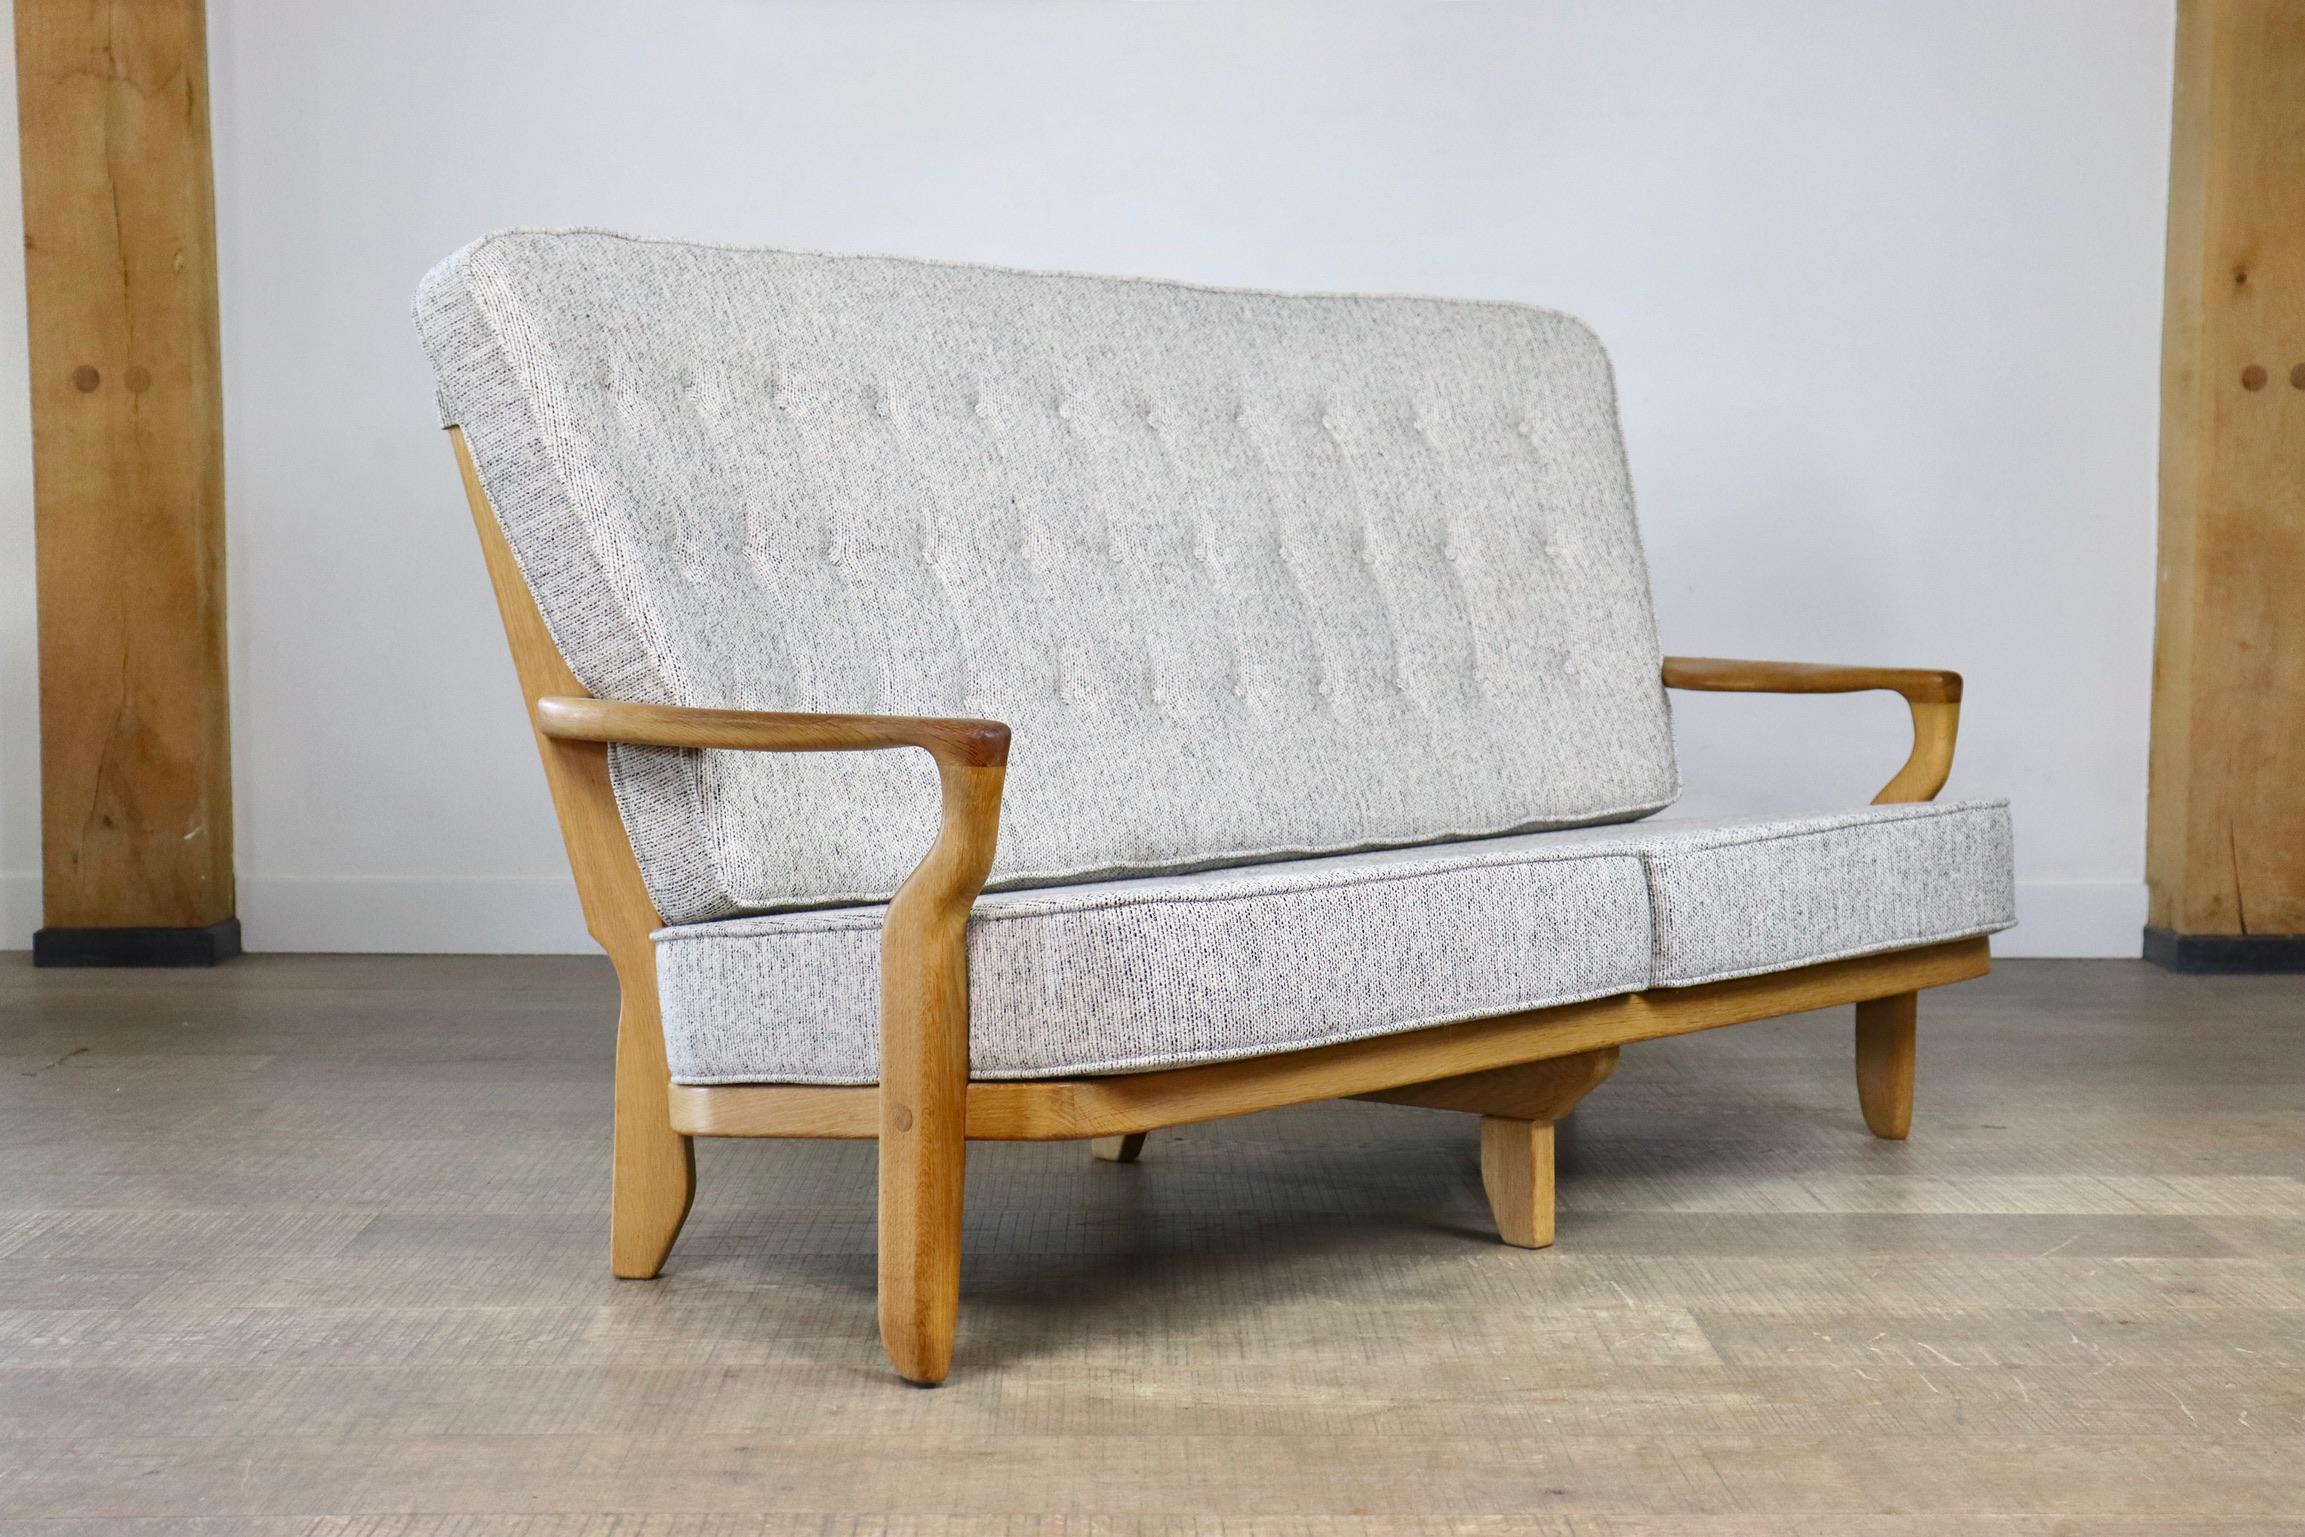 Gorgeous ‘Juliette’ sofa designed by Robert Guillerme et Jacques Chambron, France 1955. These sofas have very nice open structure made of solid oak carved spines, that is what this designer duo was known for. This particular has brand new foam and